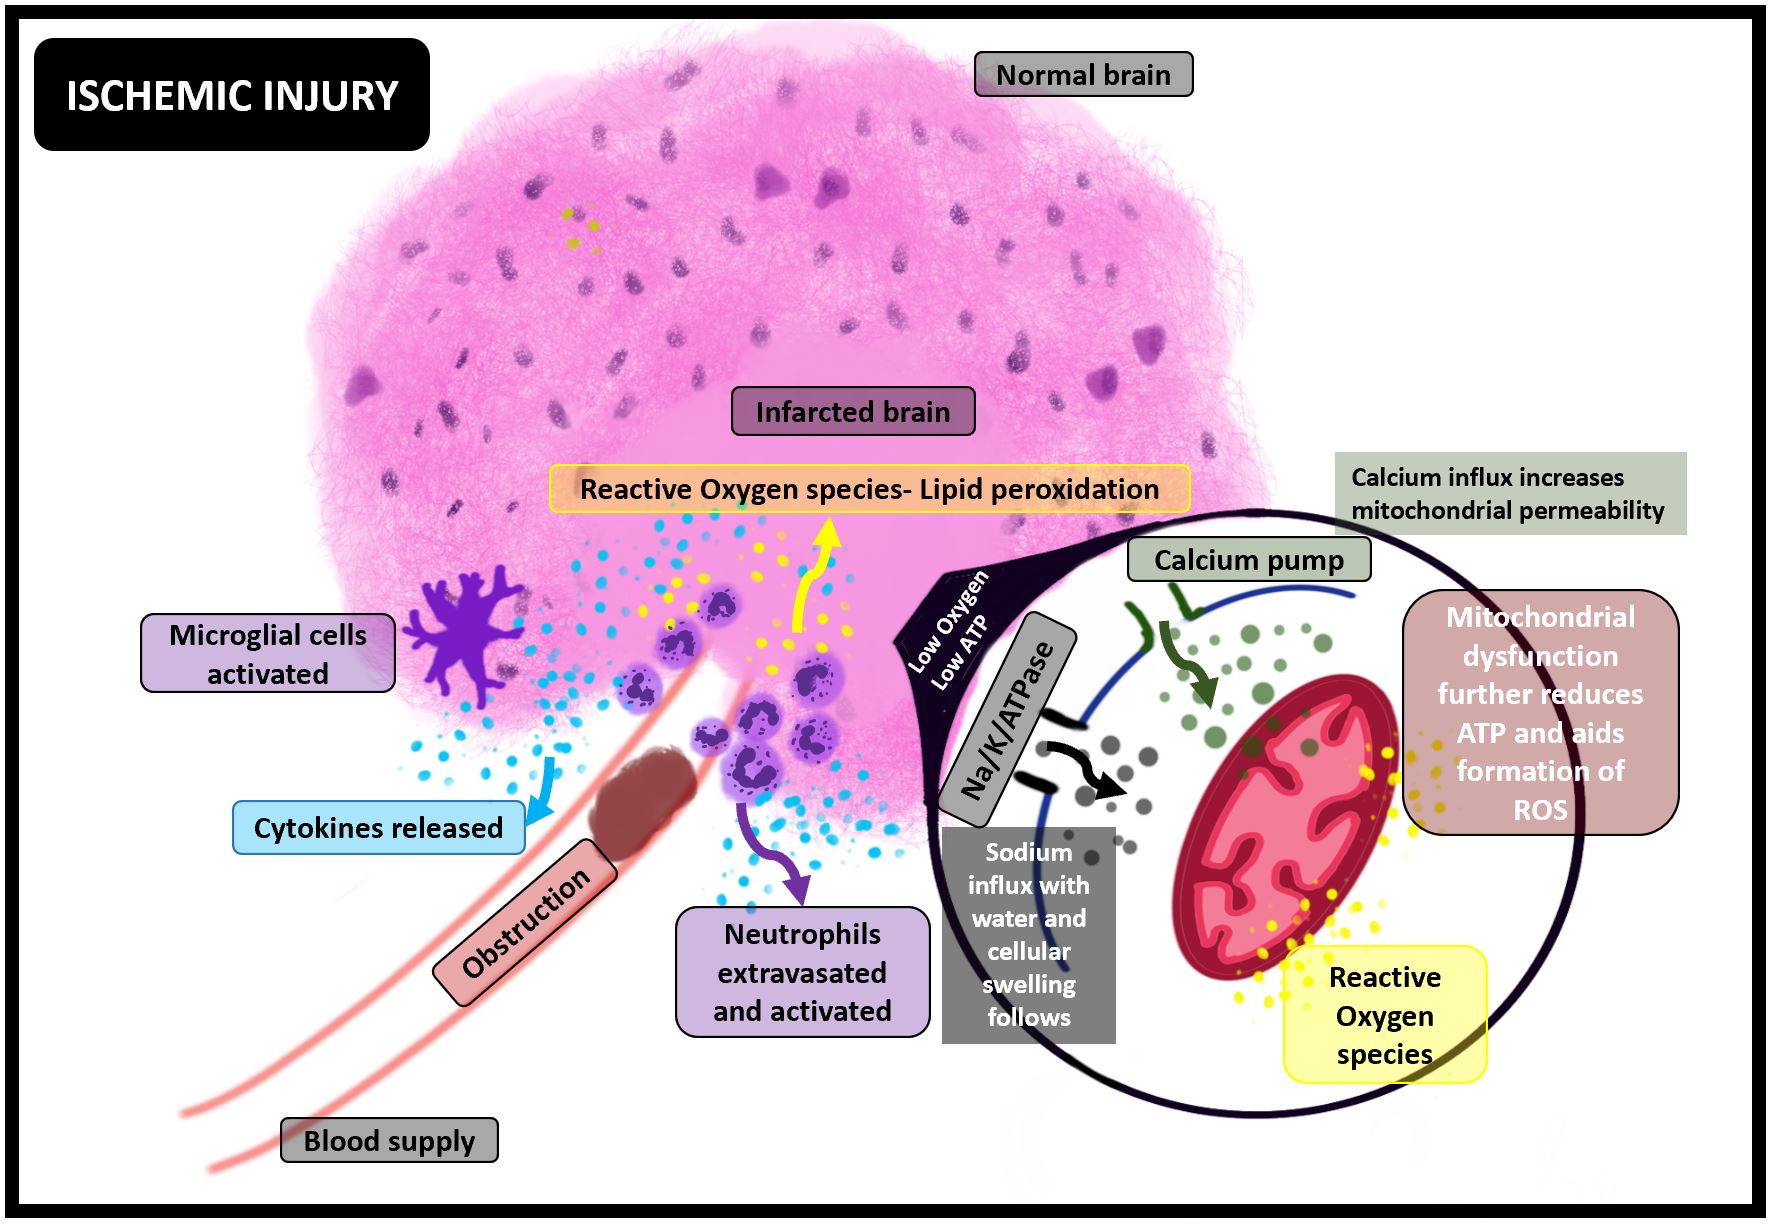 <p>Ischemic Injury and its Molecular Consequences</p>